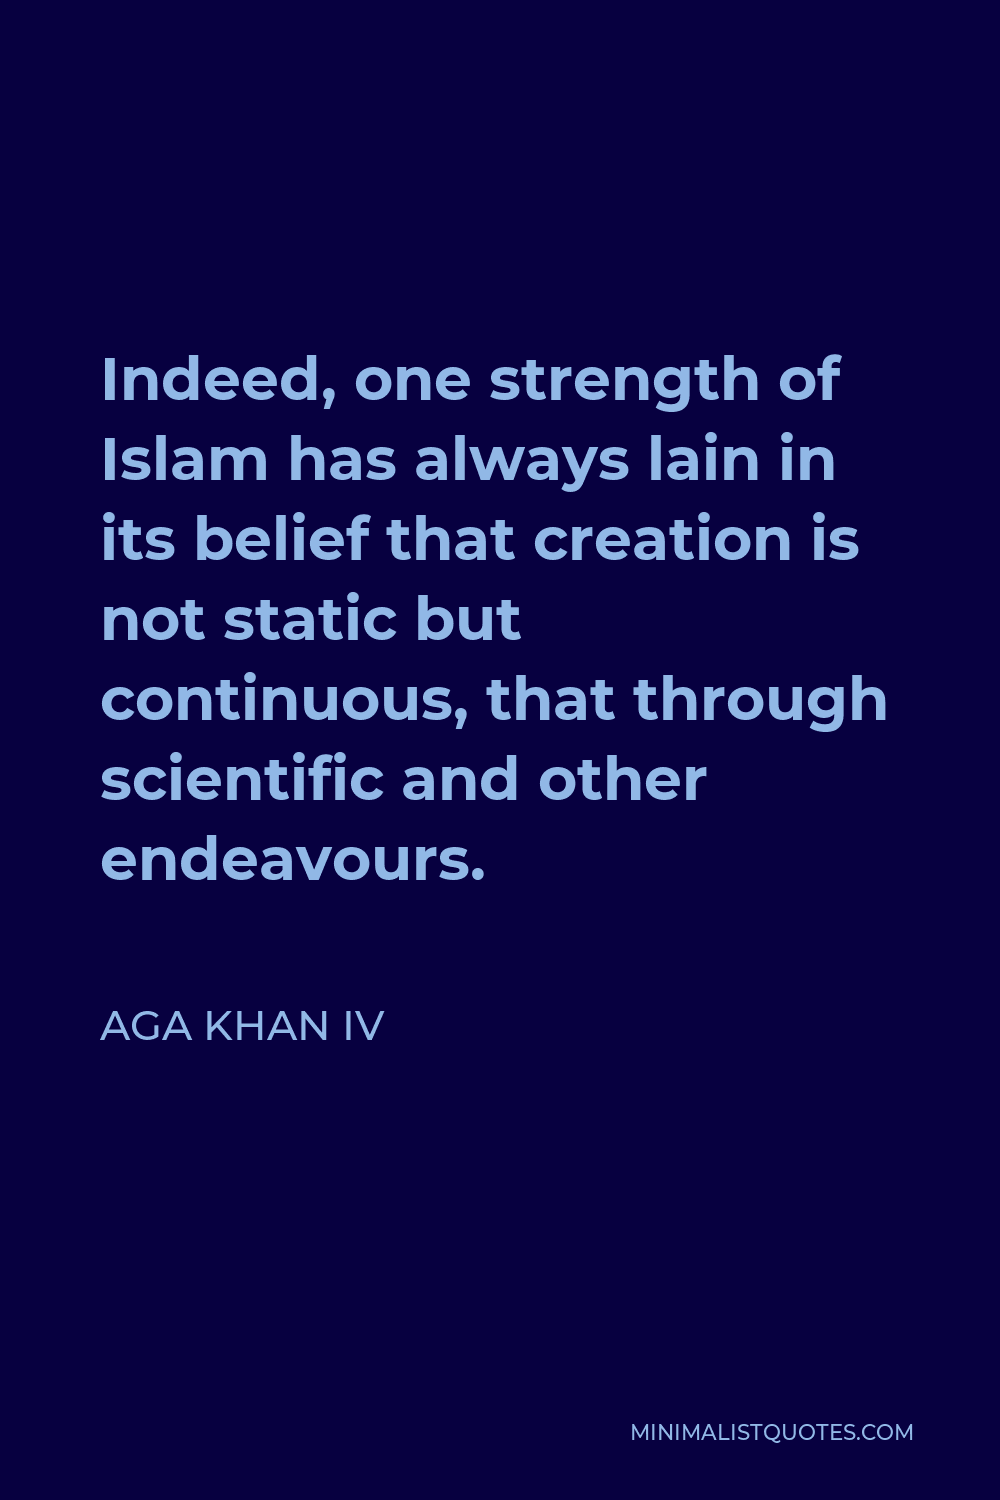 Aga Khan IV Quote - Indeed, one strength of Islam has always lain in its belief that creation is not static but continuous, that through scientific and other endeavours.